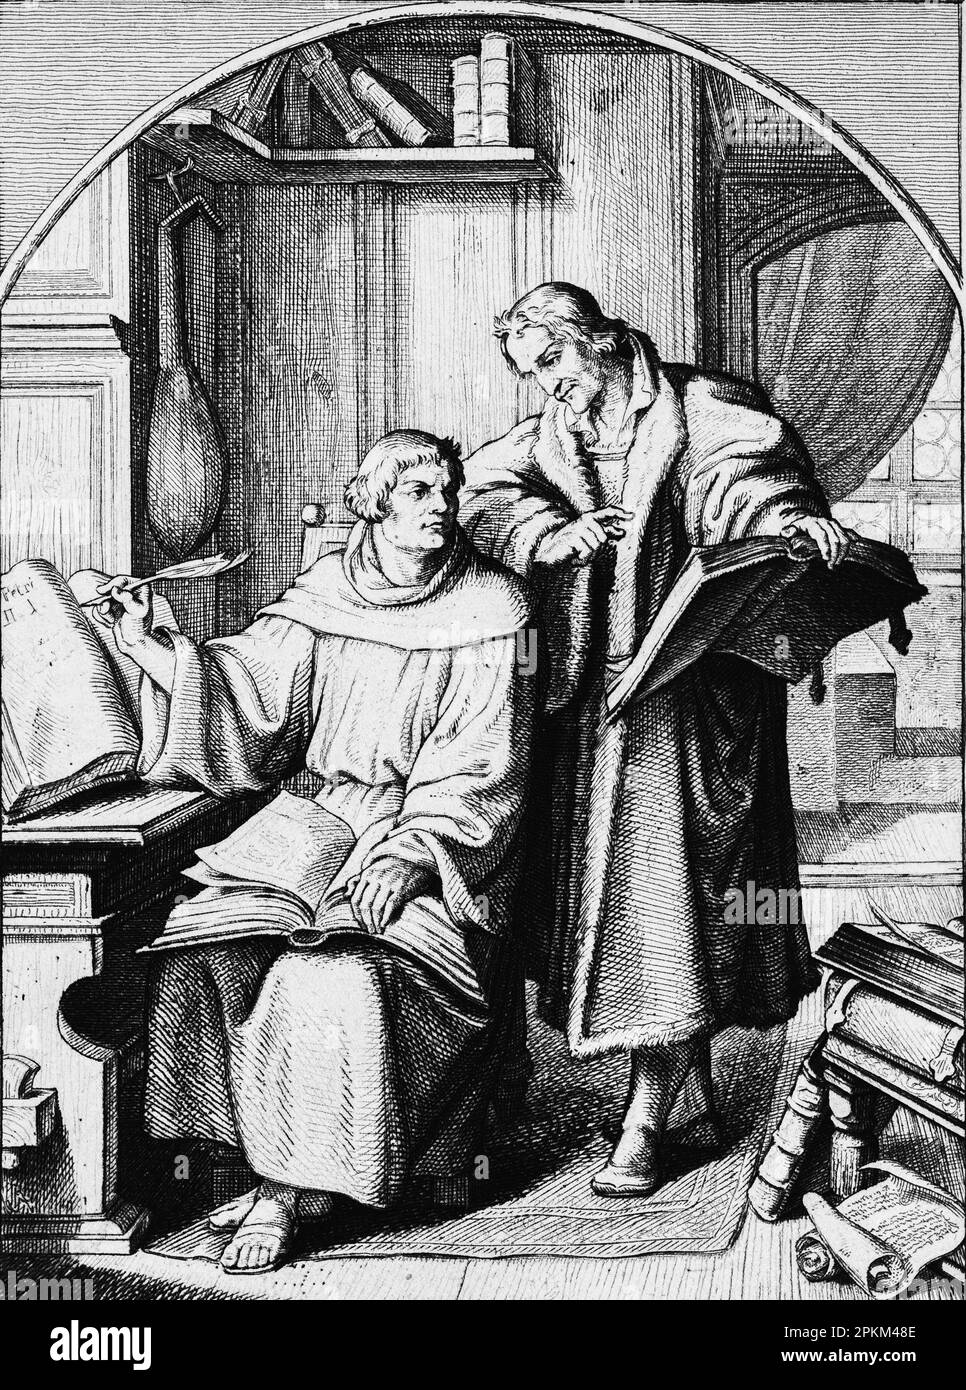 With the help of Philipp Melanchthon Luther proceeds translating the Latin bible 1523-1524, historical illustration 1851 Stock Photo